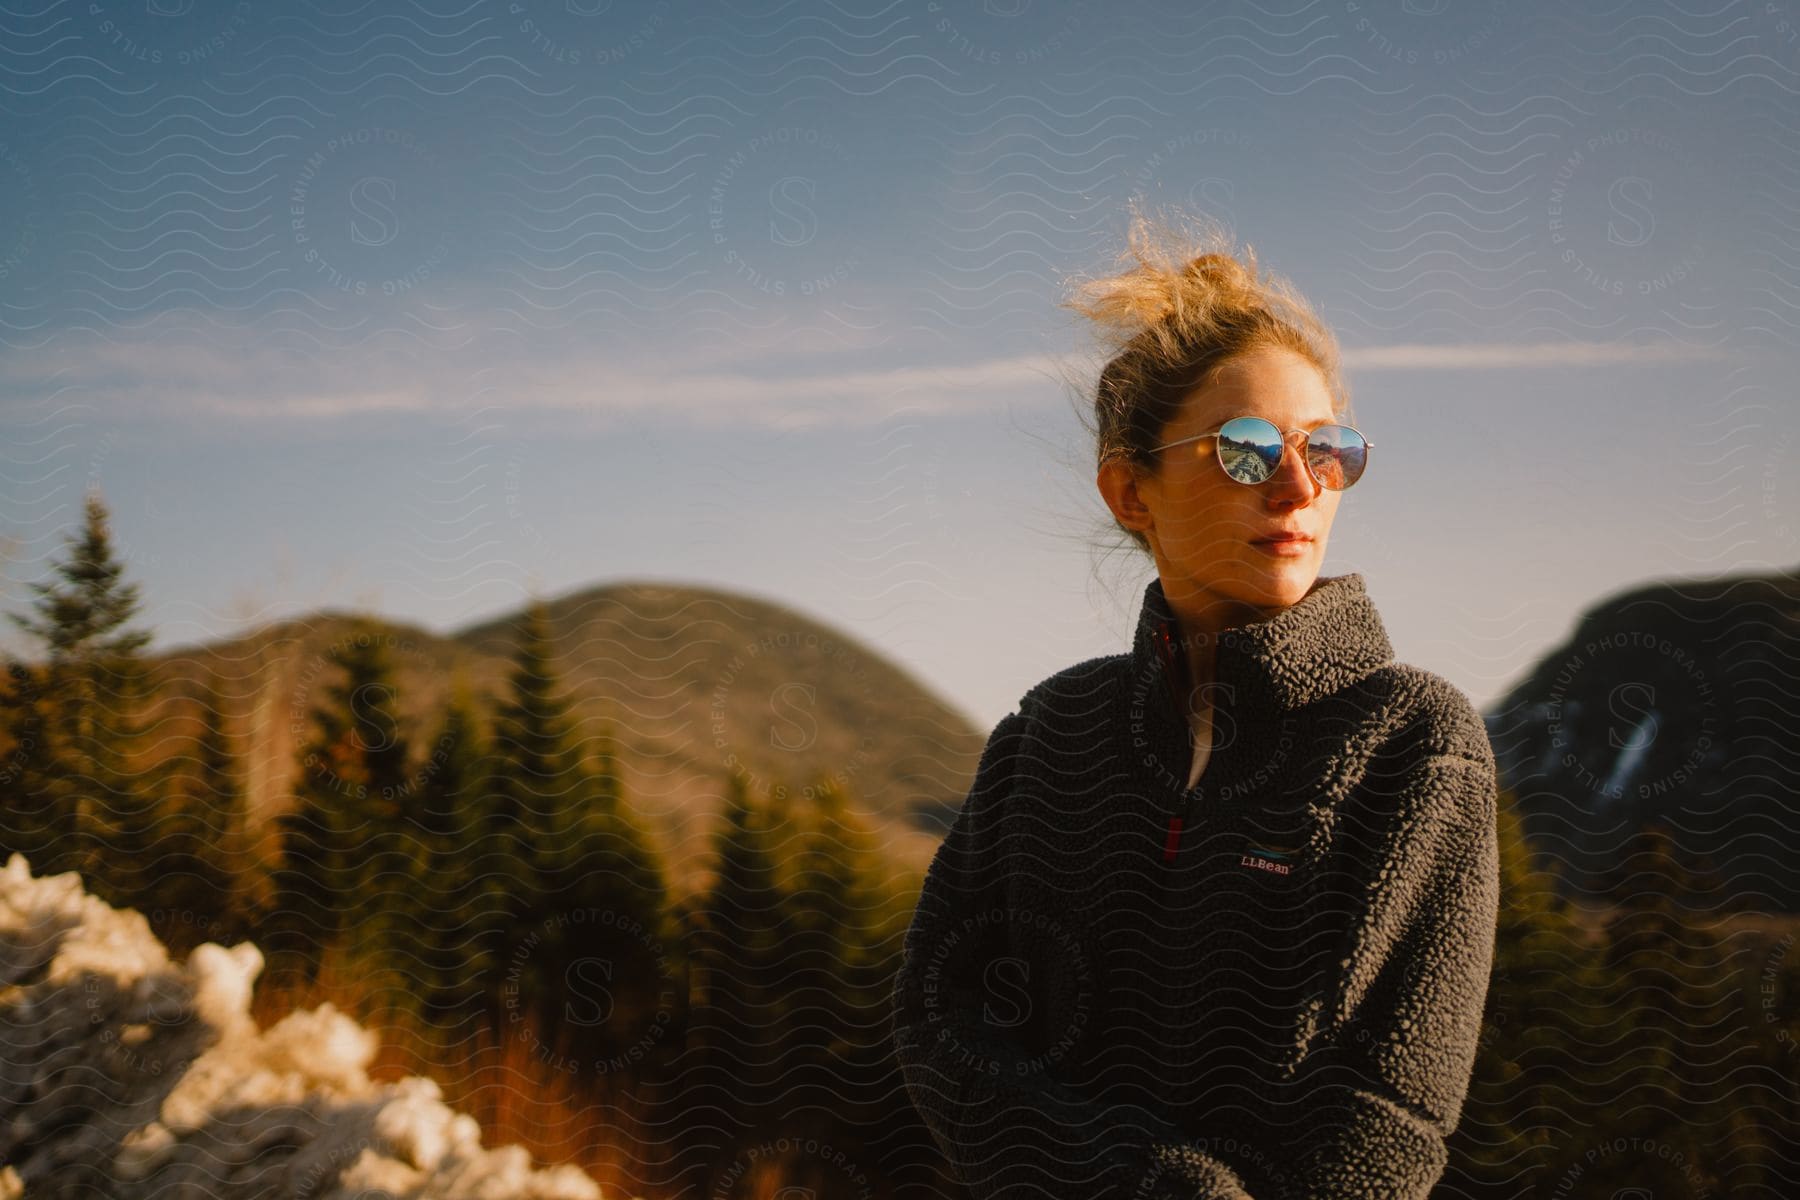 Portrait of a blonde woman with glasses in a natural environment with trees and mountains.